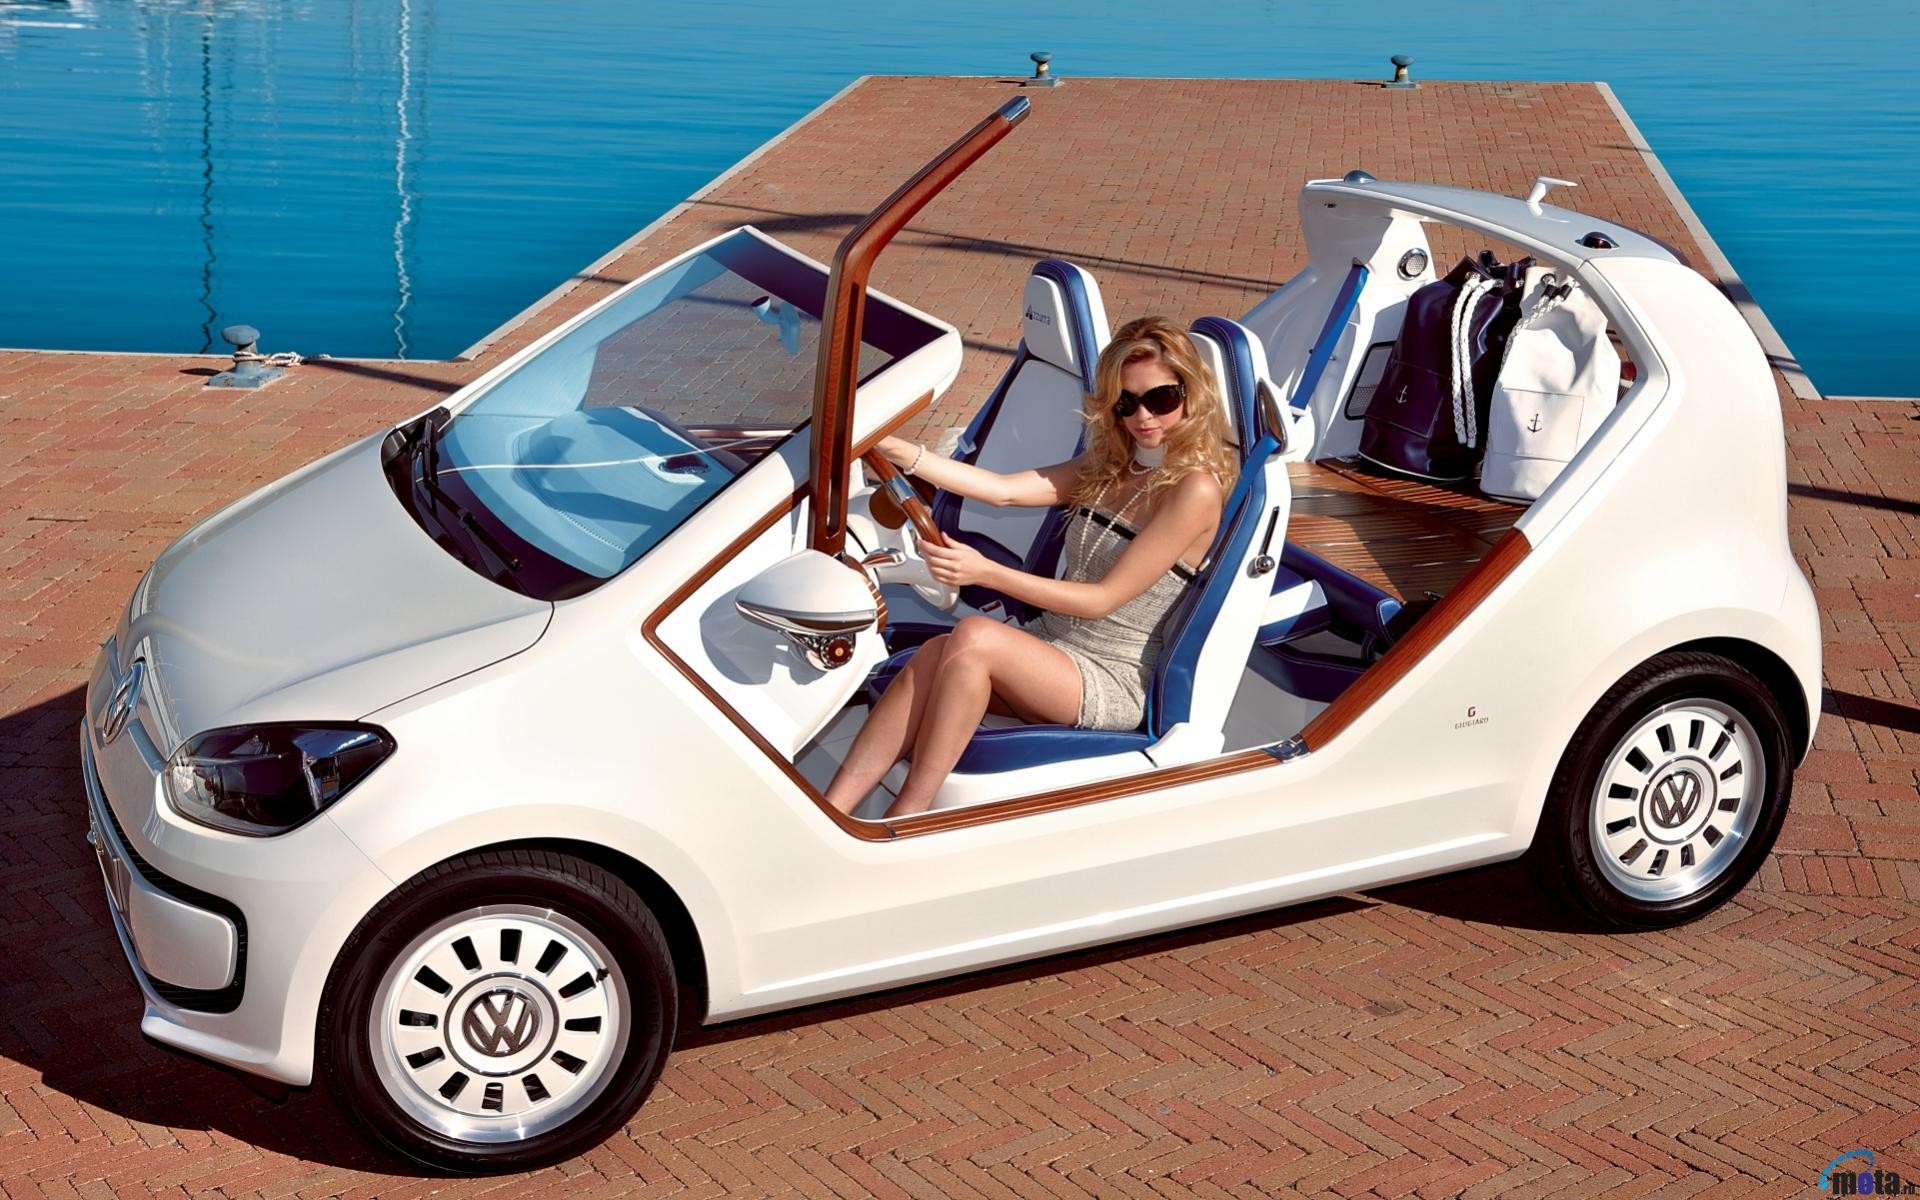 People 1920x1200 cabrio women with cars Volkswagen white cars Volkswagen Up! car vehicle car interior steering wheel women model blonde sunglasses women with shades dress thighs legs sitting women outdoors water